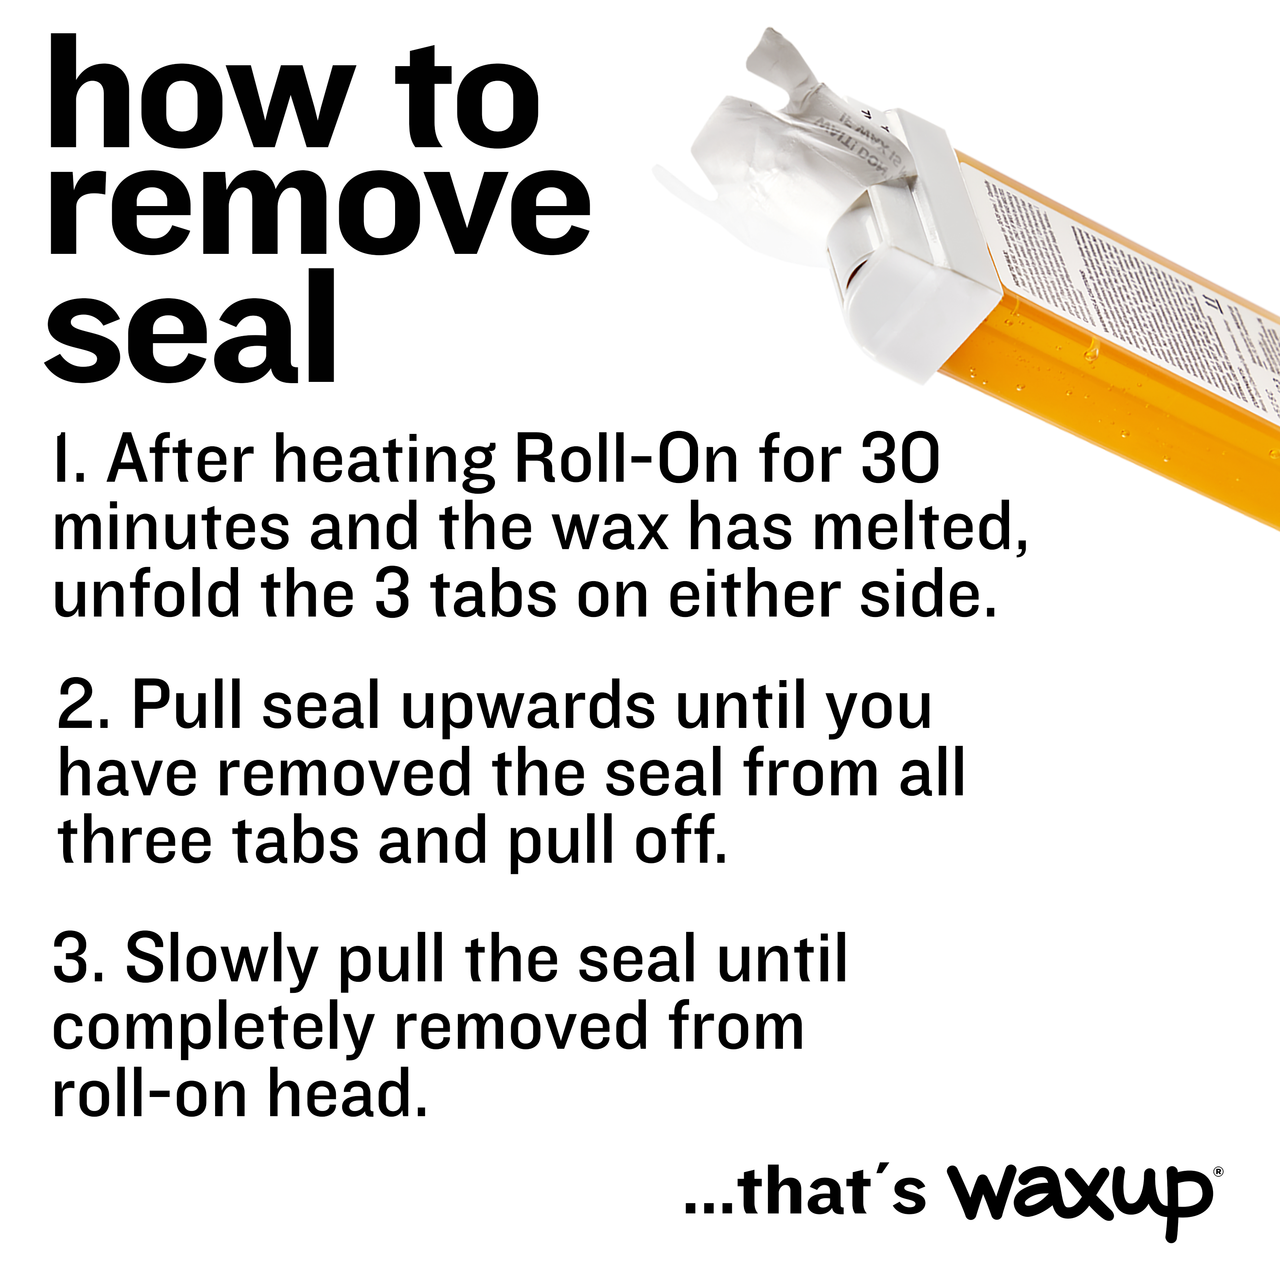 Honey Roller Waxing Kit Refill Small - thatswaxup -  - Roller Waxing Kit - waxup hair removal wax body waxing kit women and men professional waxing supplies